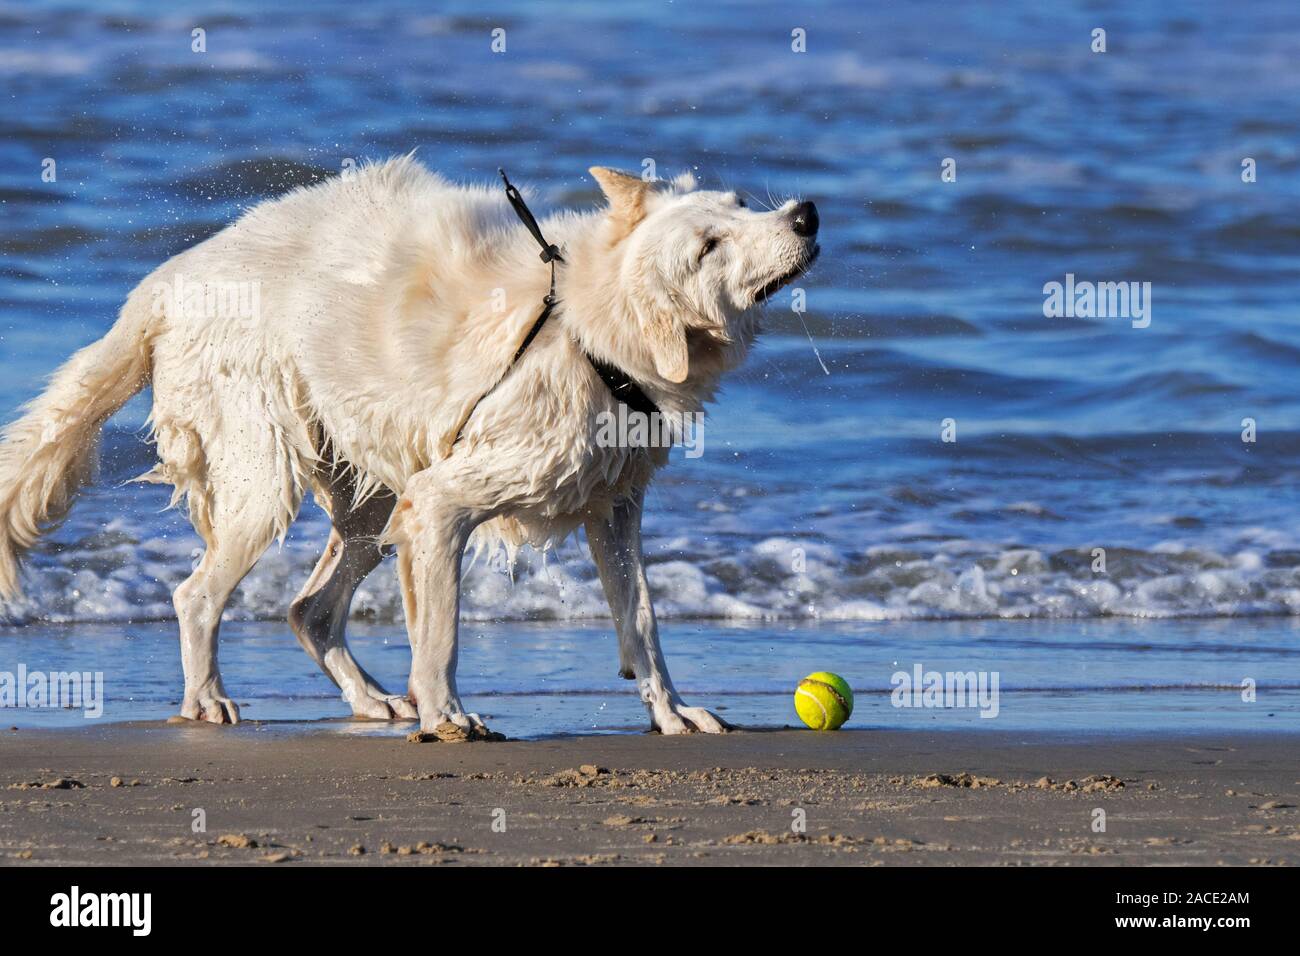 Unleashed Berger Blanc Suisse / White Swiss Shepherd dog on the beach shaking wet fur dry after fetching tennis ball from sea water Stock Photo